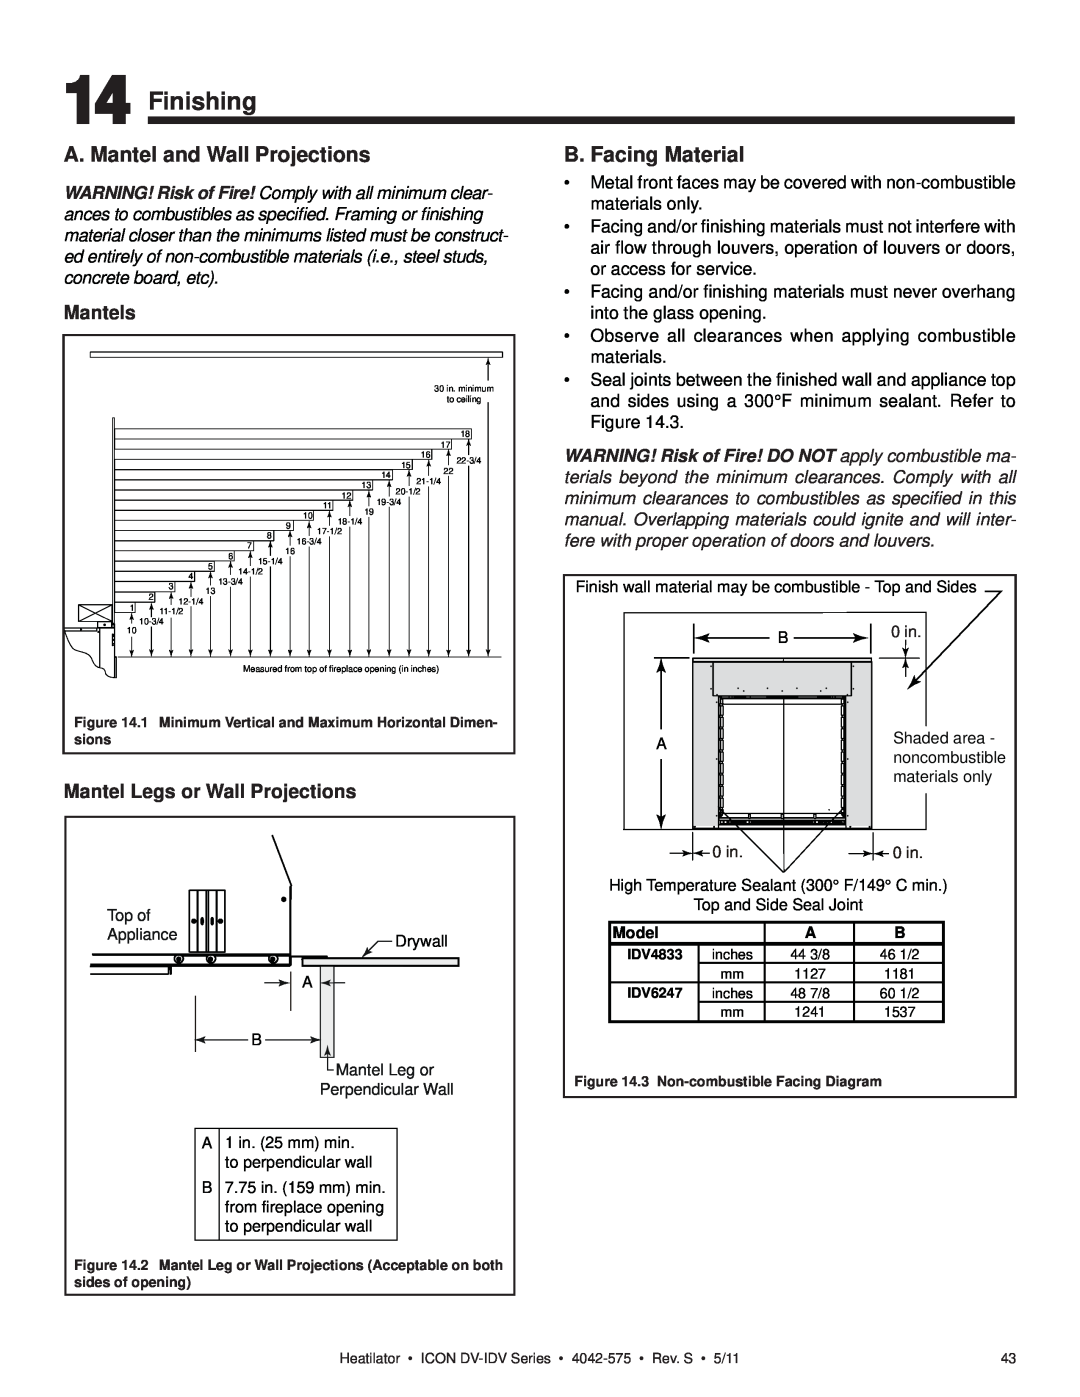 Heatiator IDV4833IT owner manual Finishing, A. Mantel and Wall Projections, B. Facing Material, Mantels 